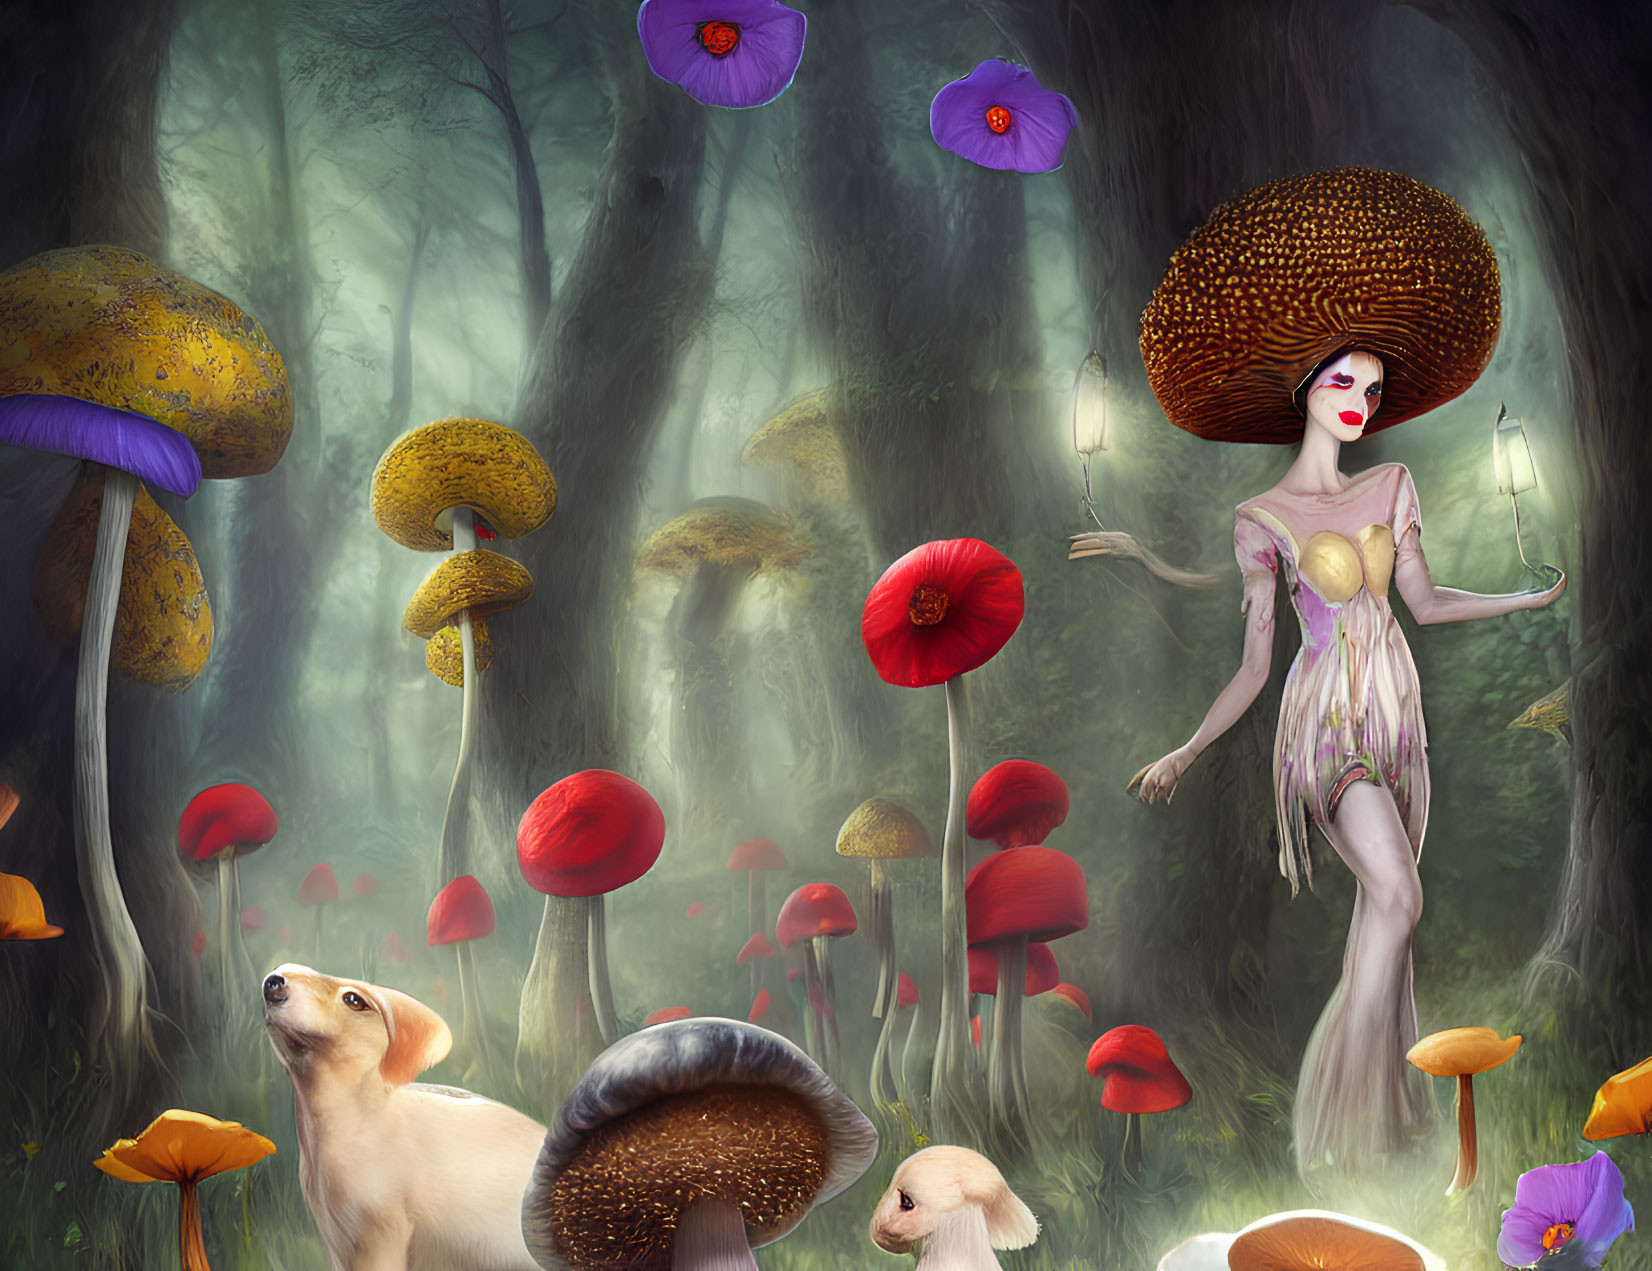 Colorful oversized mushrooms in whimsical forest scene with unique characters.